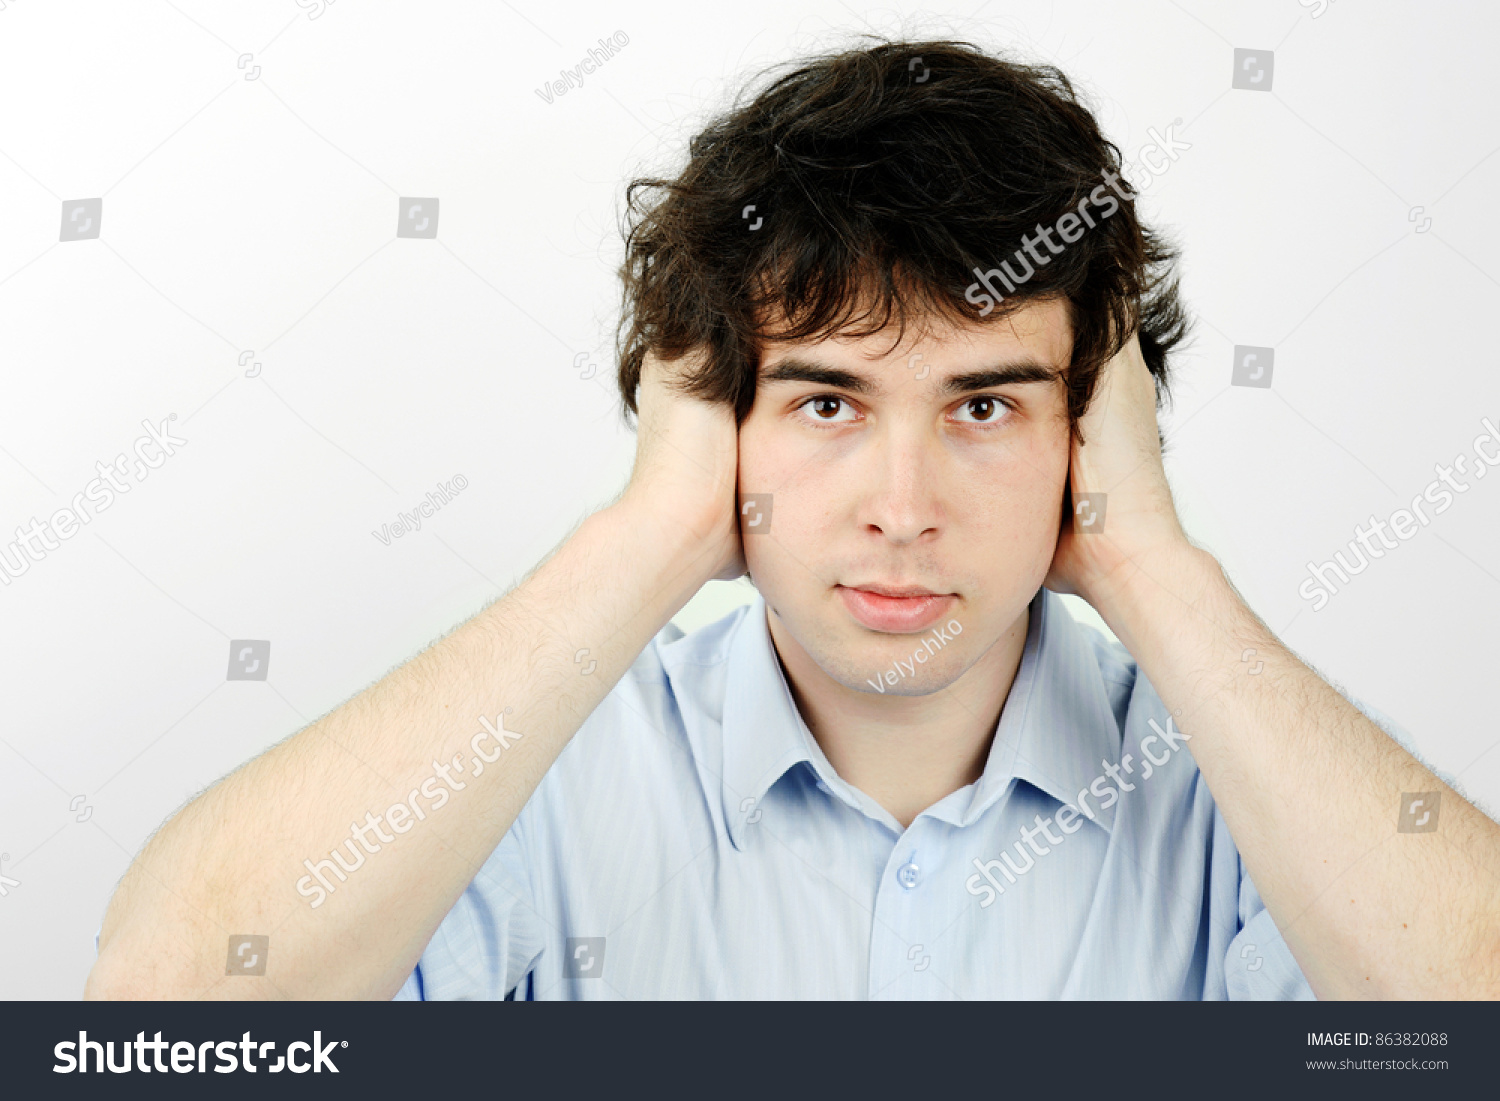 Image Worker His Ears Closed Stock Photo 86382088 | Shutterstock